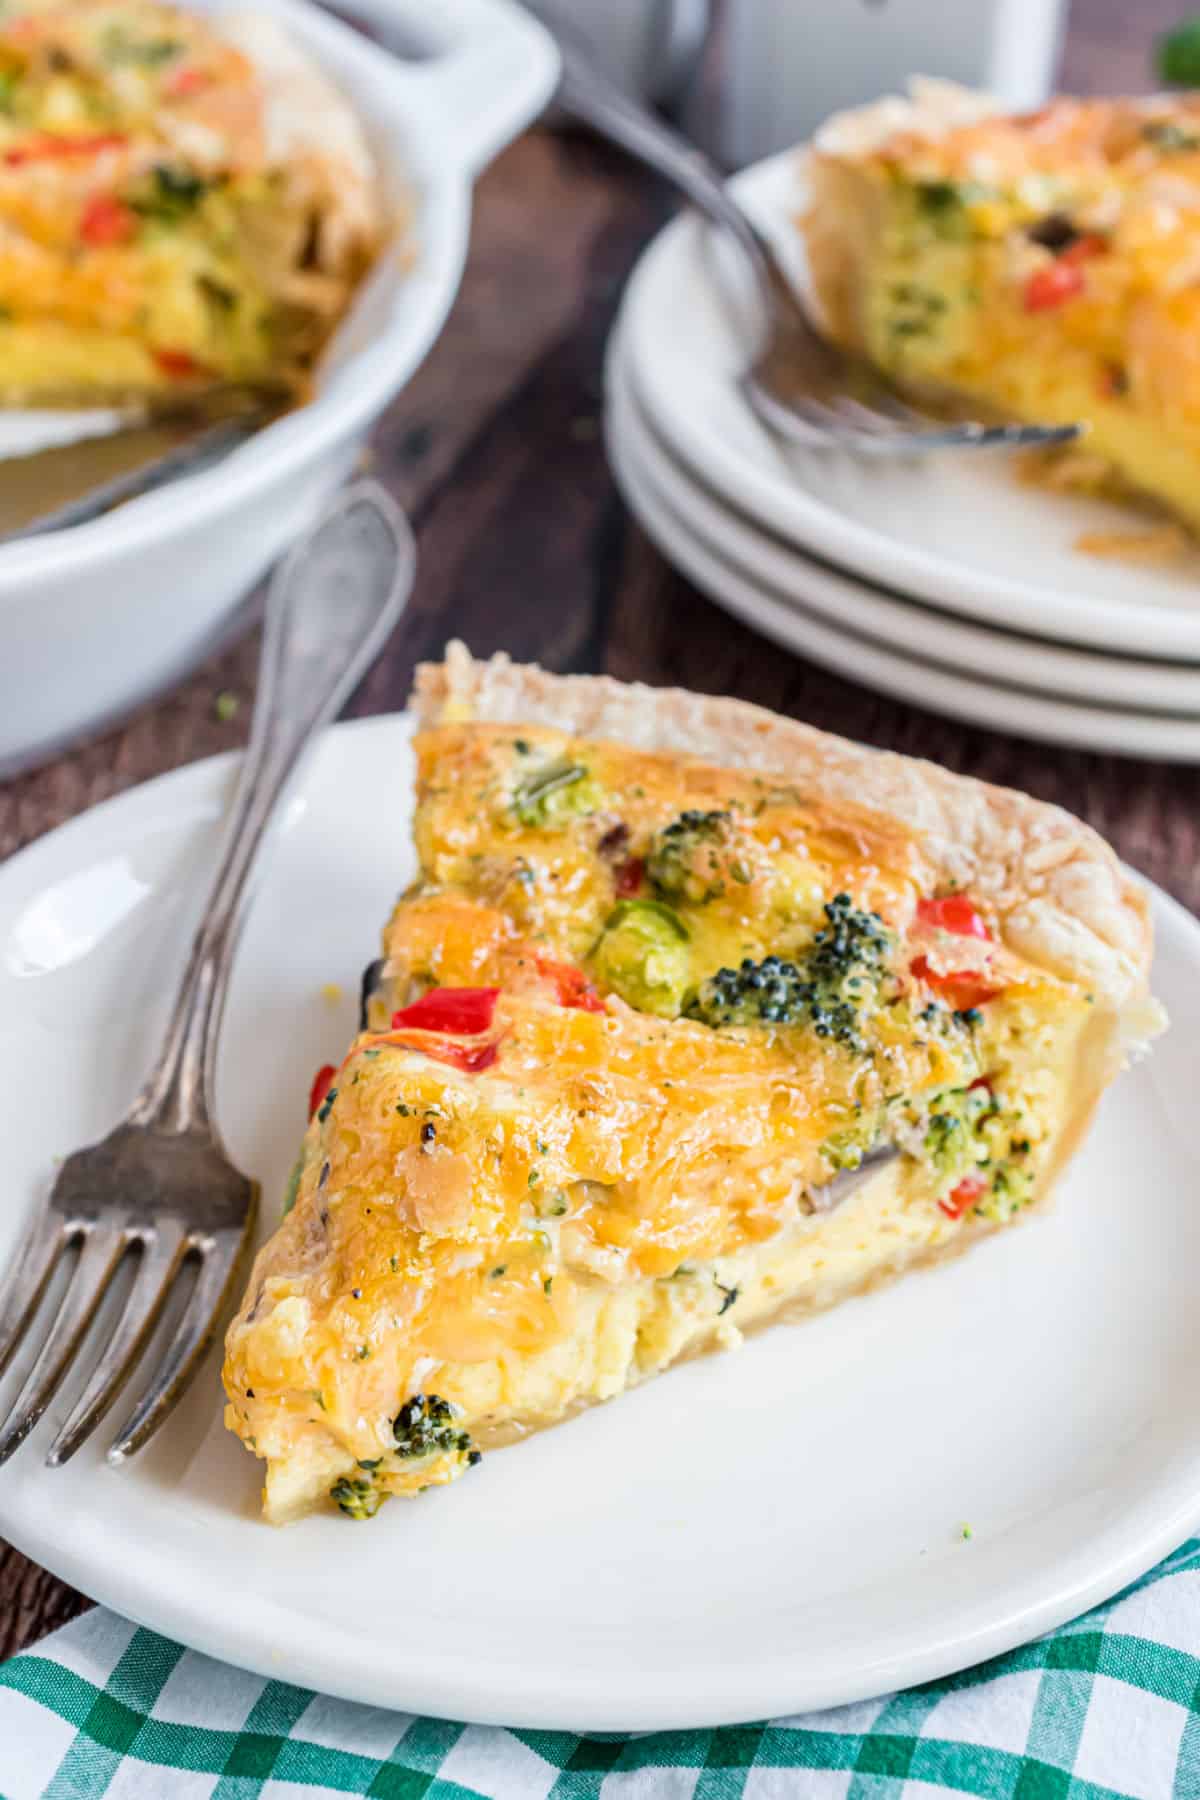 Easy Vegetable Quiche Recipe - Shugary Sweets